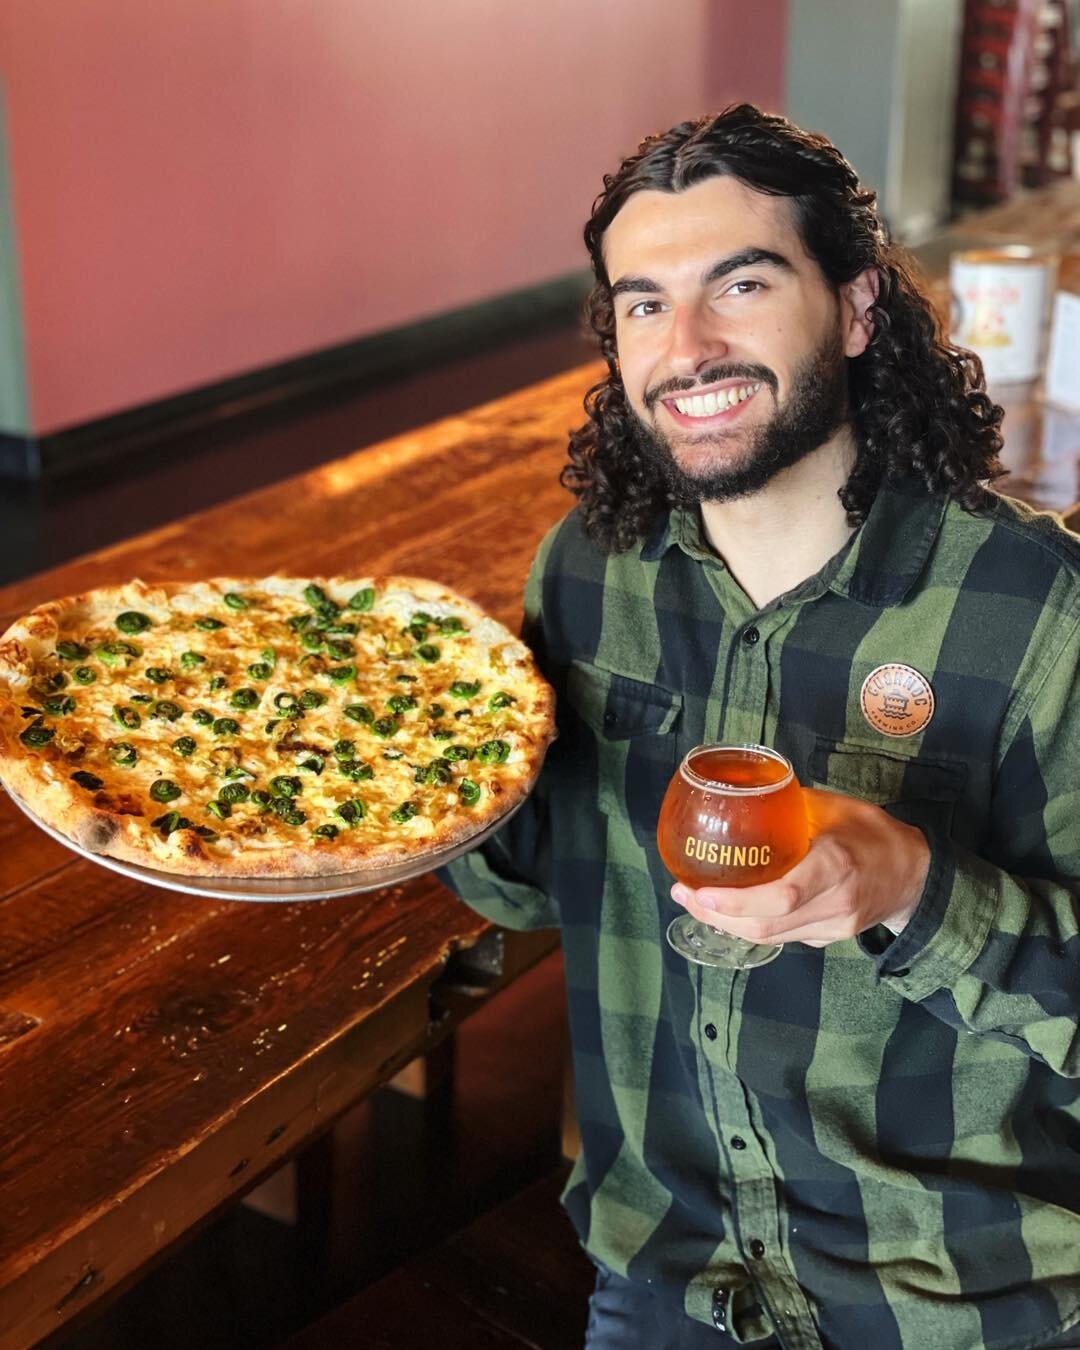 🚨🌱 I T &lsquo; S  B A C K 🌱🚨

FIDDLEHEAD PIE!
Fresh local fiddleheads, lemon ricotta, saut&eacute;ed leeks, and Gruyere cheese.

Pair it with Golden Fiddle! 
Belgian Strong Golden Ale | 9.4 % ABV 
A devilishly strong Belgian golden ale that is li